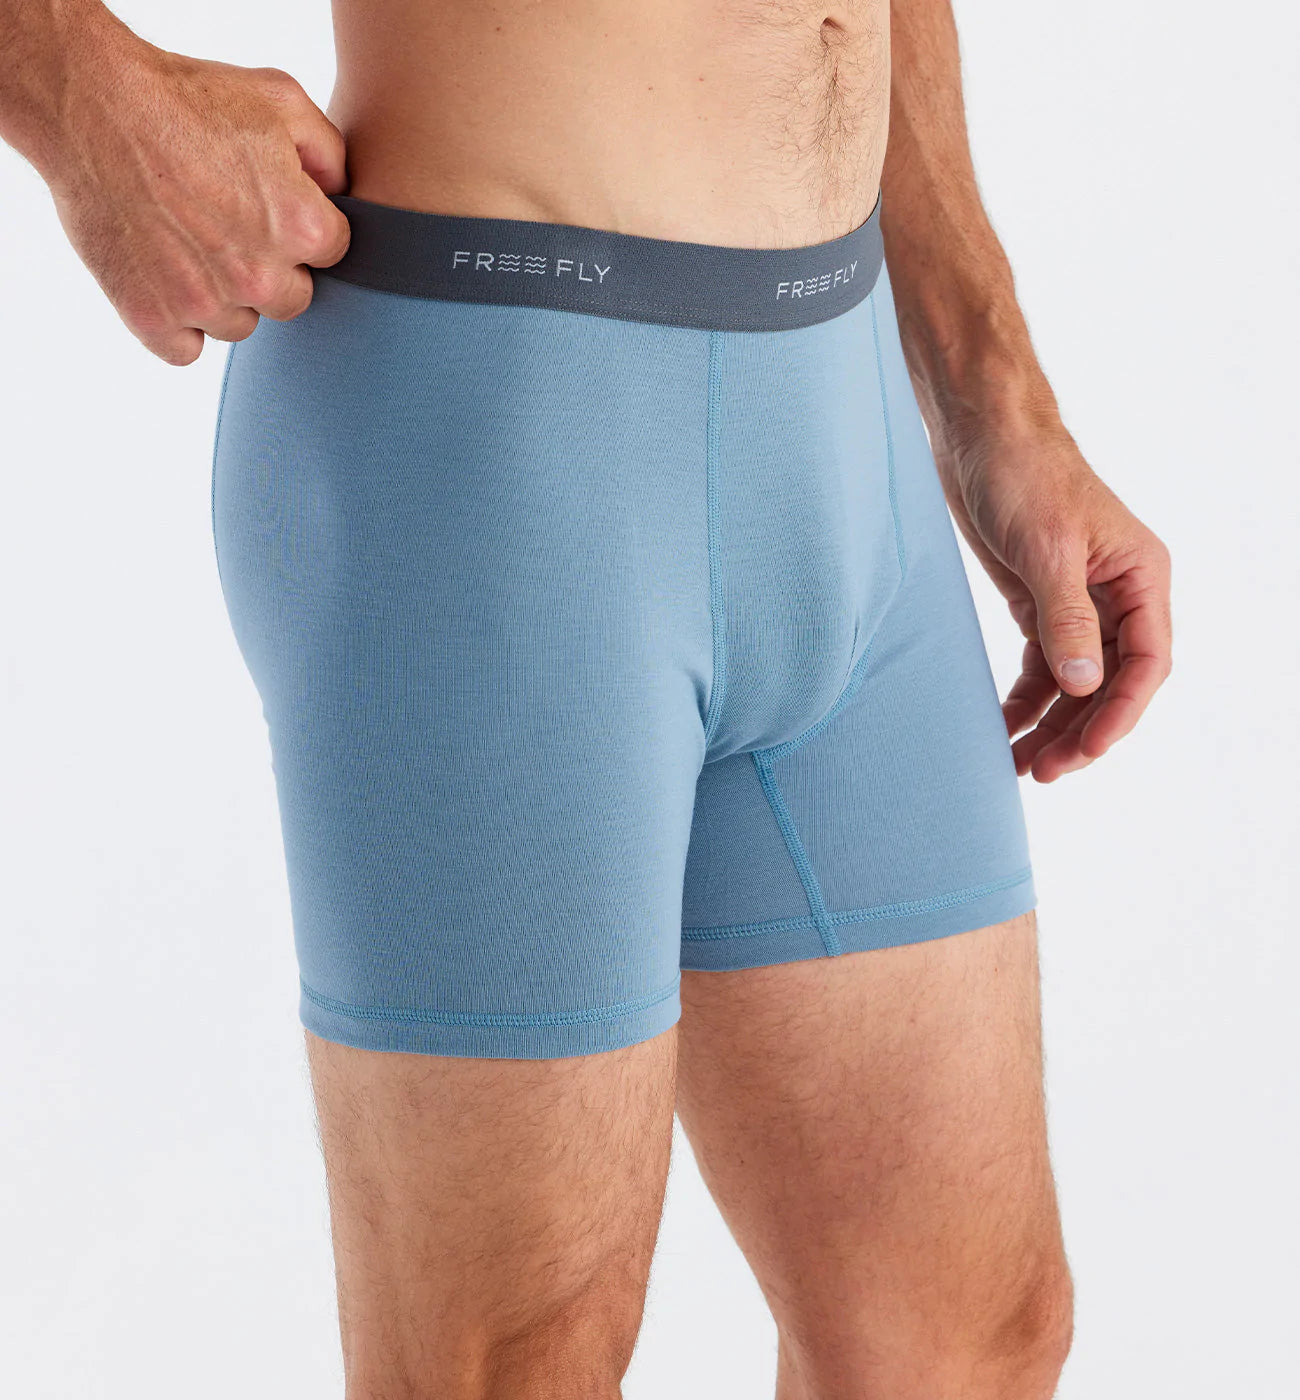 Regular Fitted Air Bamboo Boxers (Green)